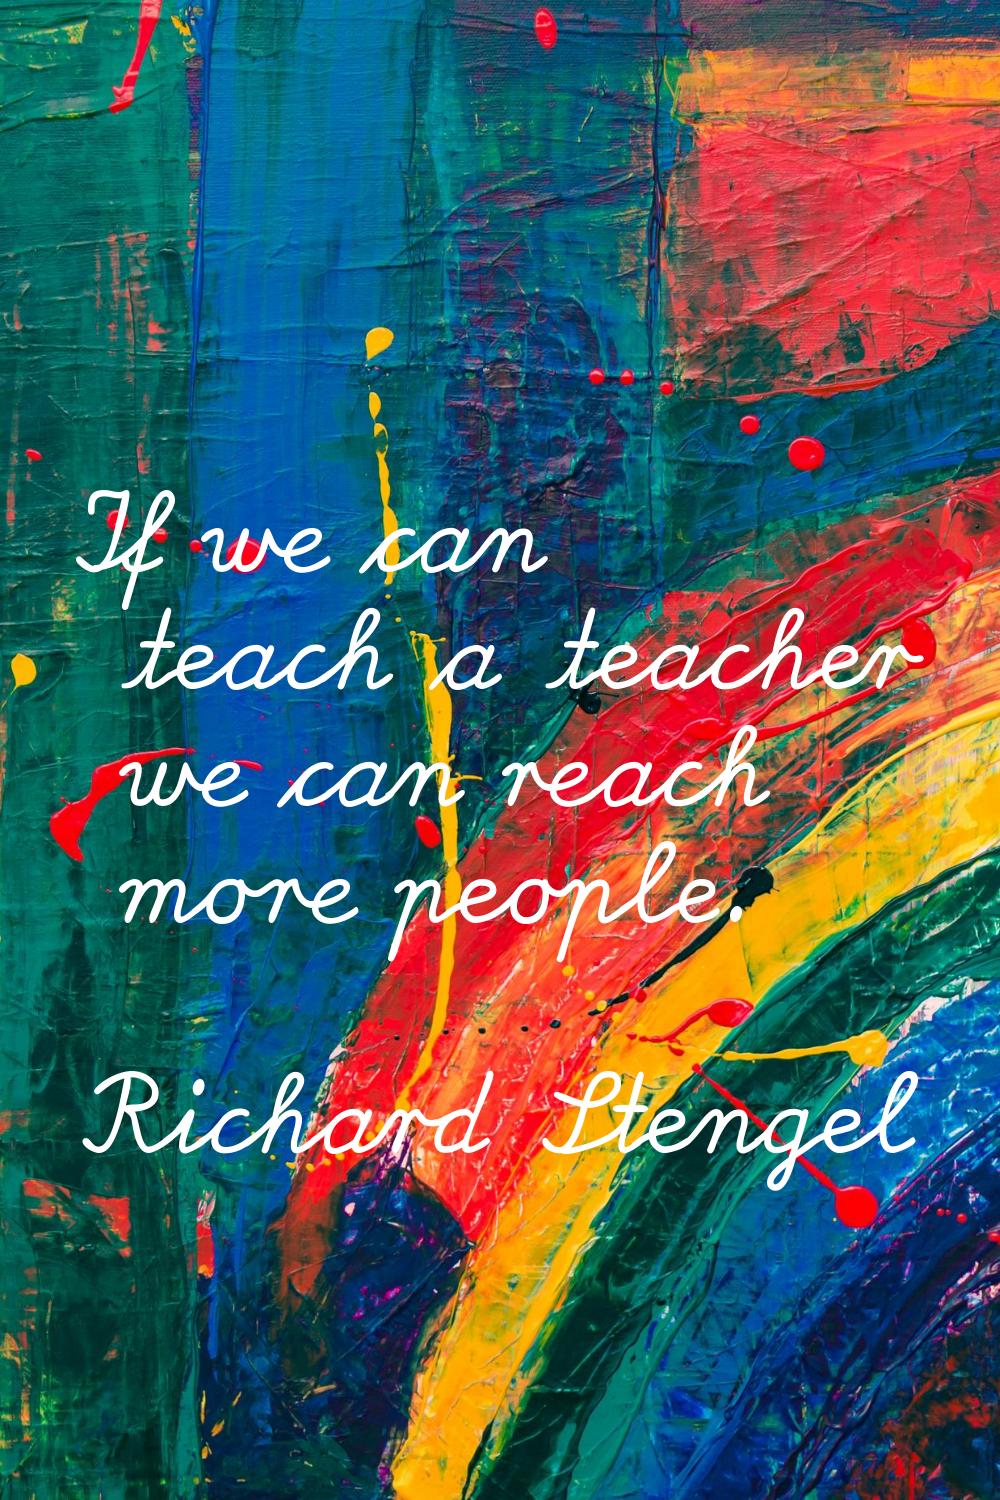 If we can teach a teacher we can reach more people.